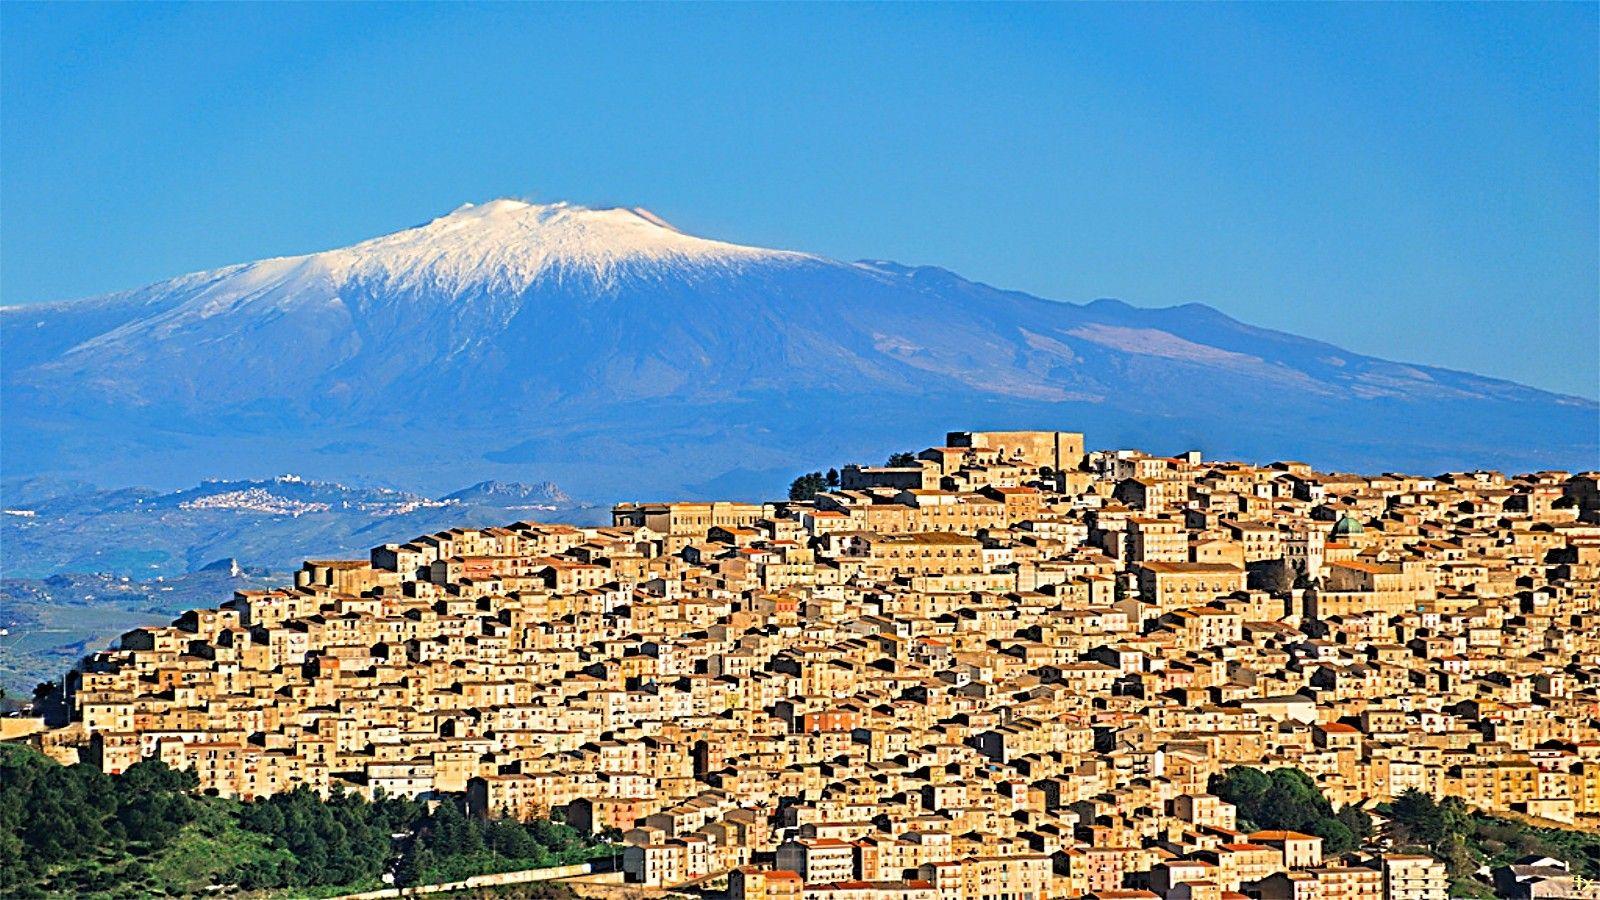 Sicily Tag wallpaper: Untitled Selinunte Sicily Italy Best